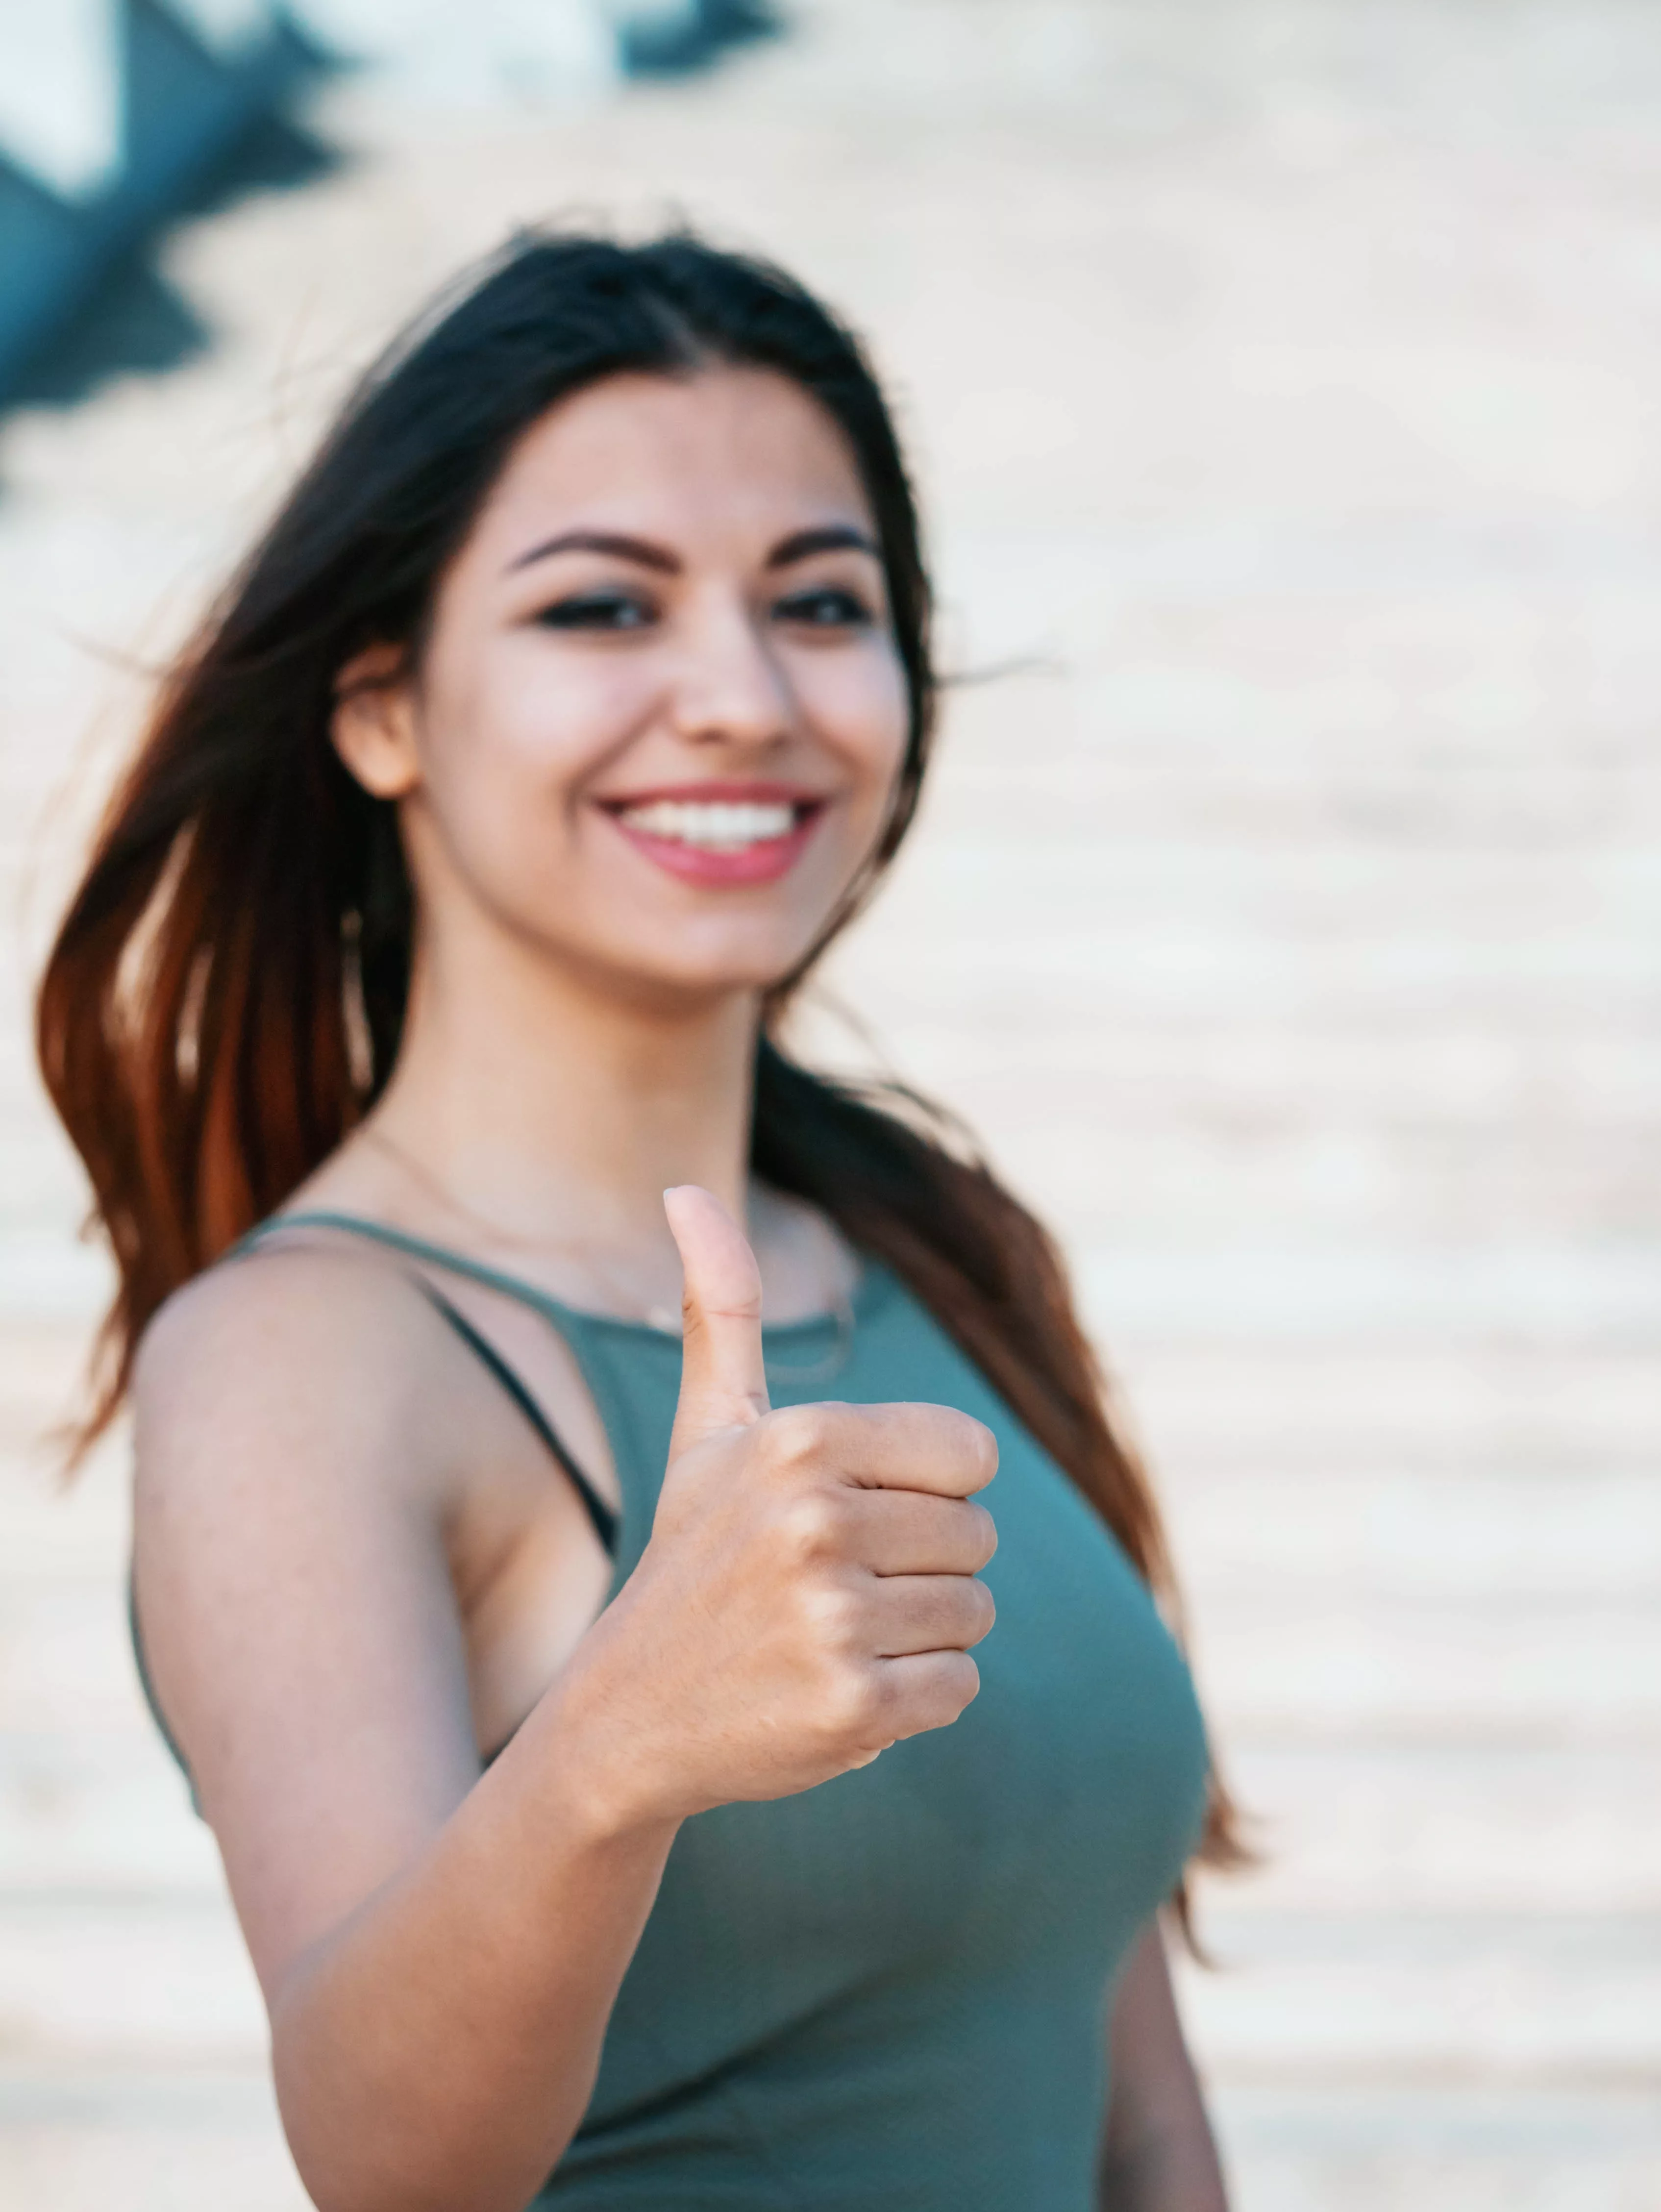 Portrait of young beautiful girl showing thumb up gesture and smiling outdoor